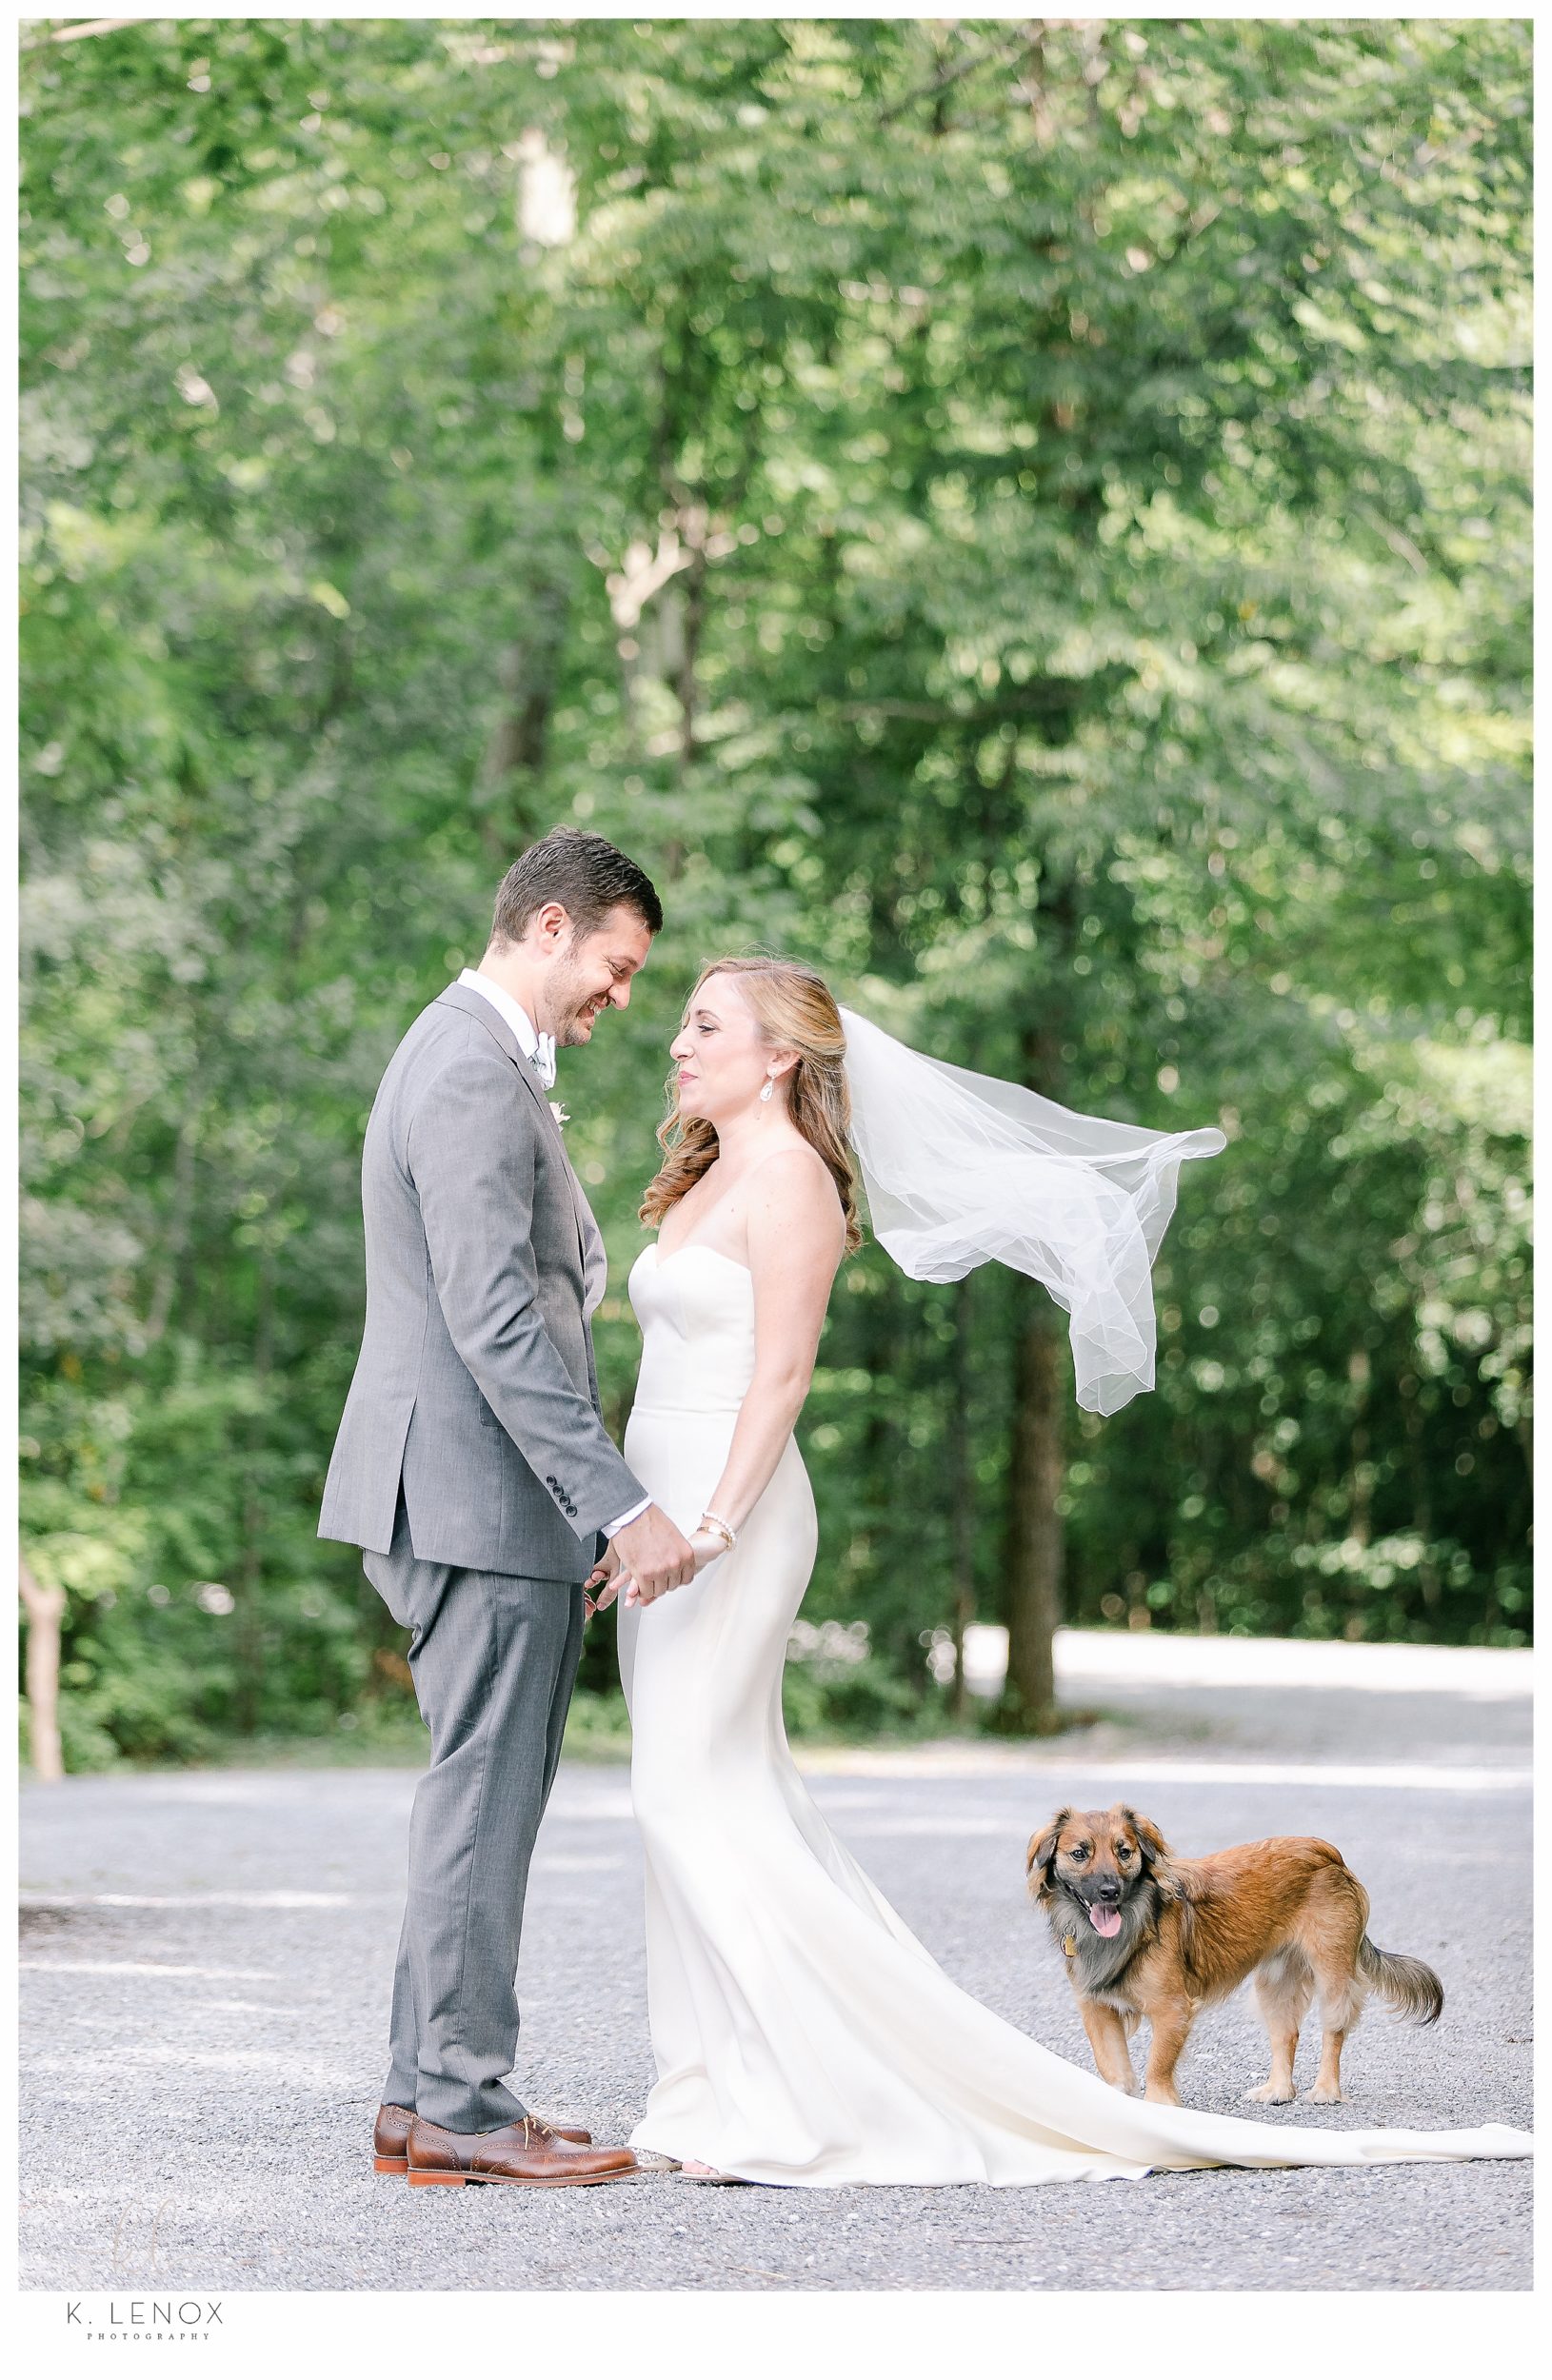 Bride and Groom stand hand in hand for a portrait on their Wedding day at the Equinox Resort, while their dog stands near. 